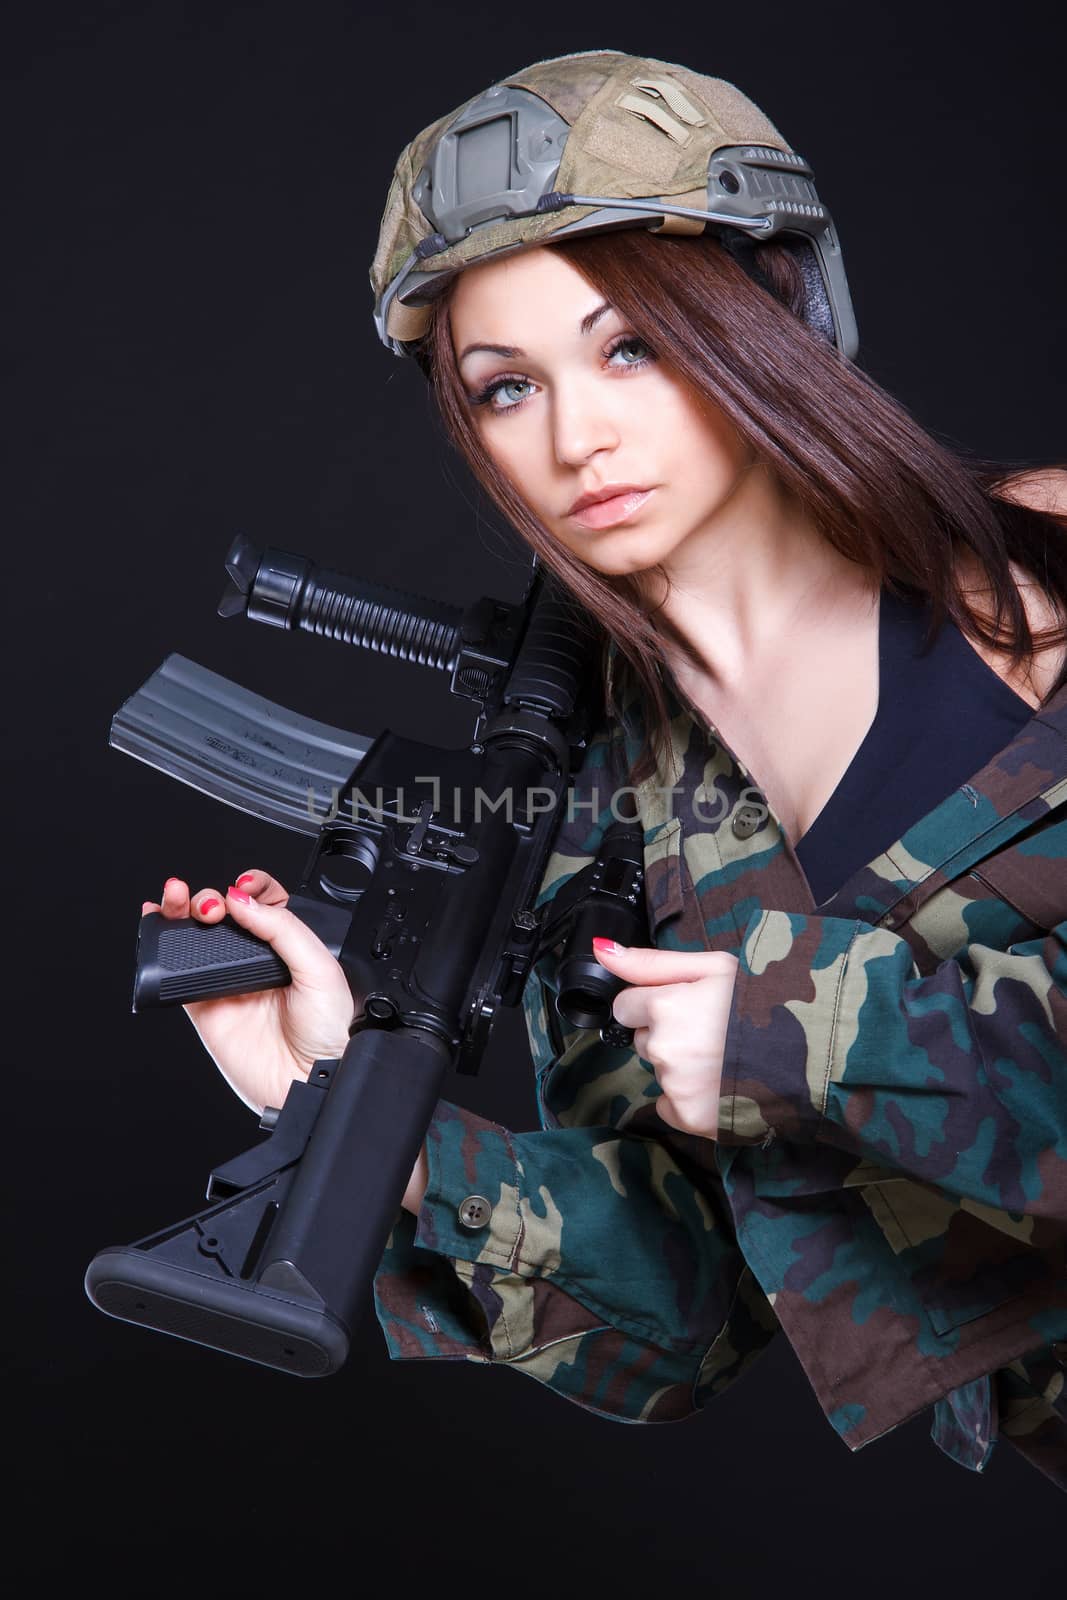 Woman in the military uniform with an assault rifle on the shoulder over black background